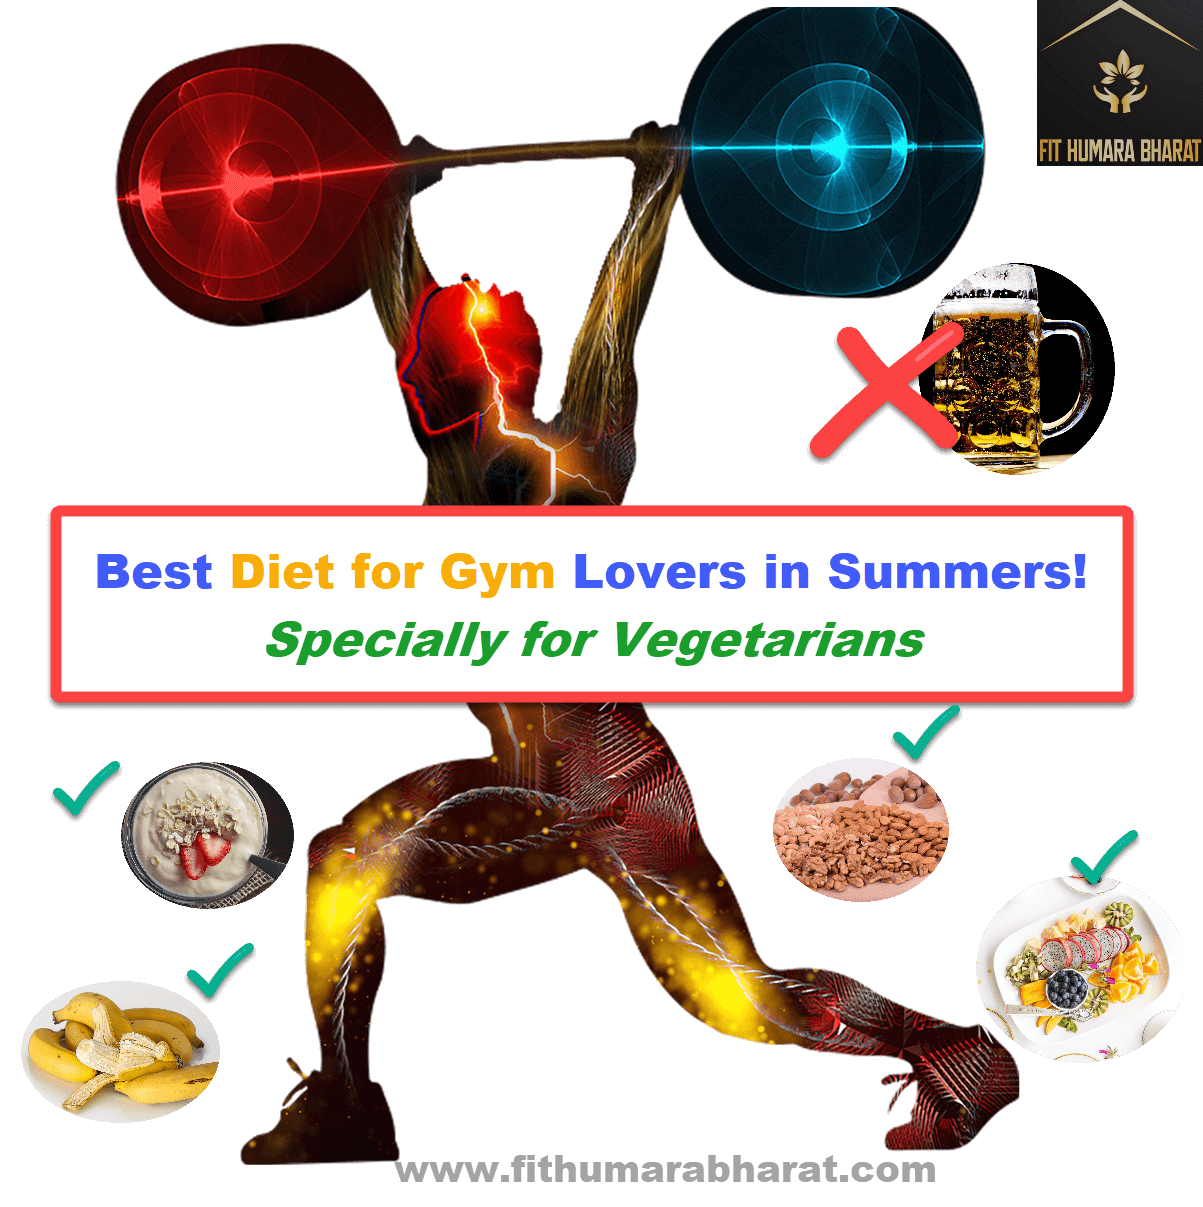 Best Diet for Gym routine in summer, specially for vegetarians fithumarabharat